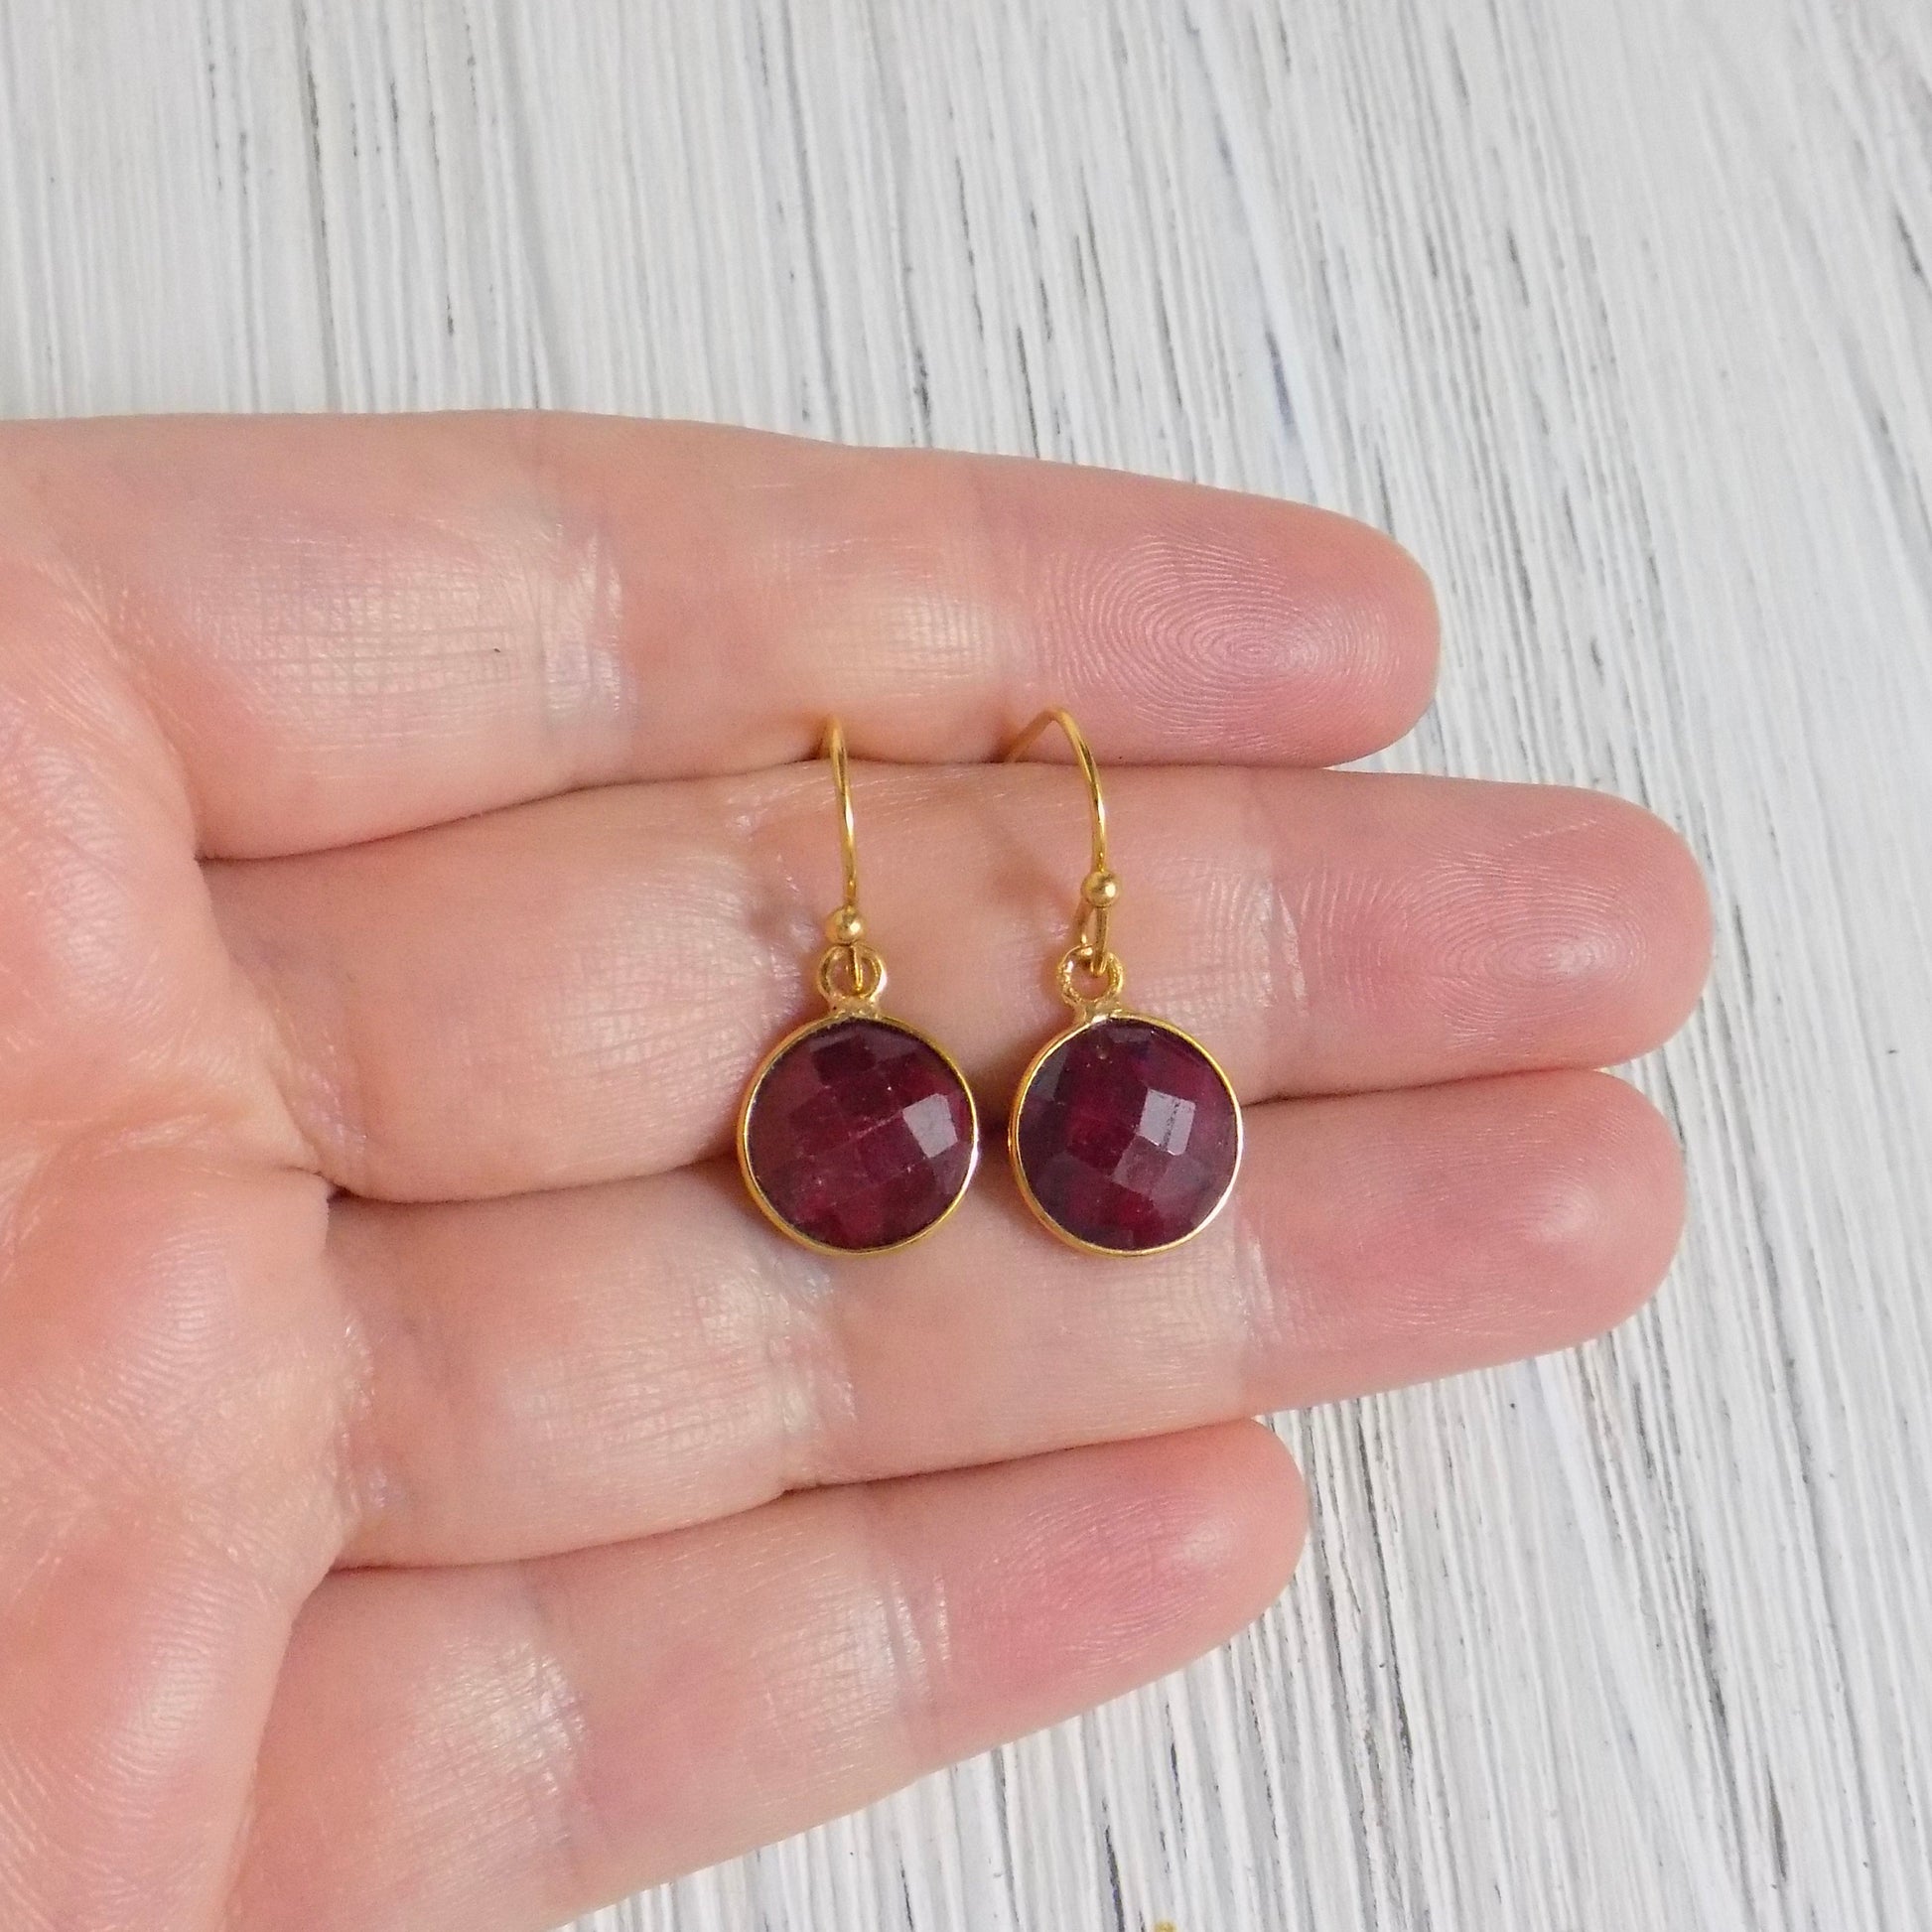 Small Raw Ruby Drop Earrings Gold, Natural Gemstone Jewelry Gifts For Women, M4-96